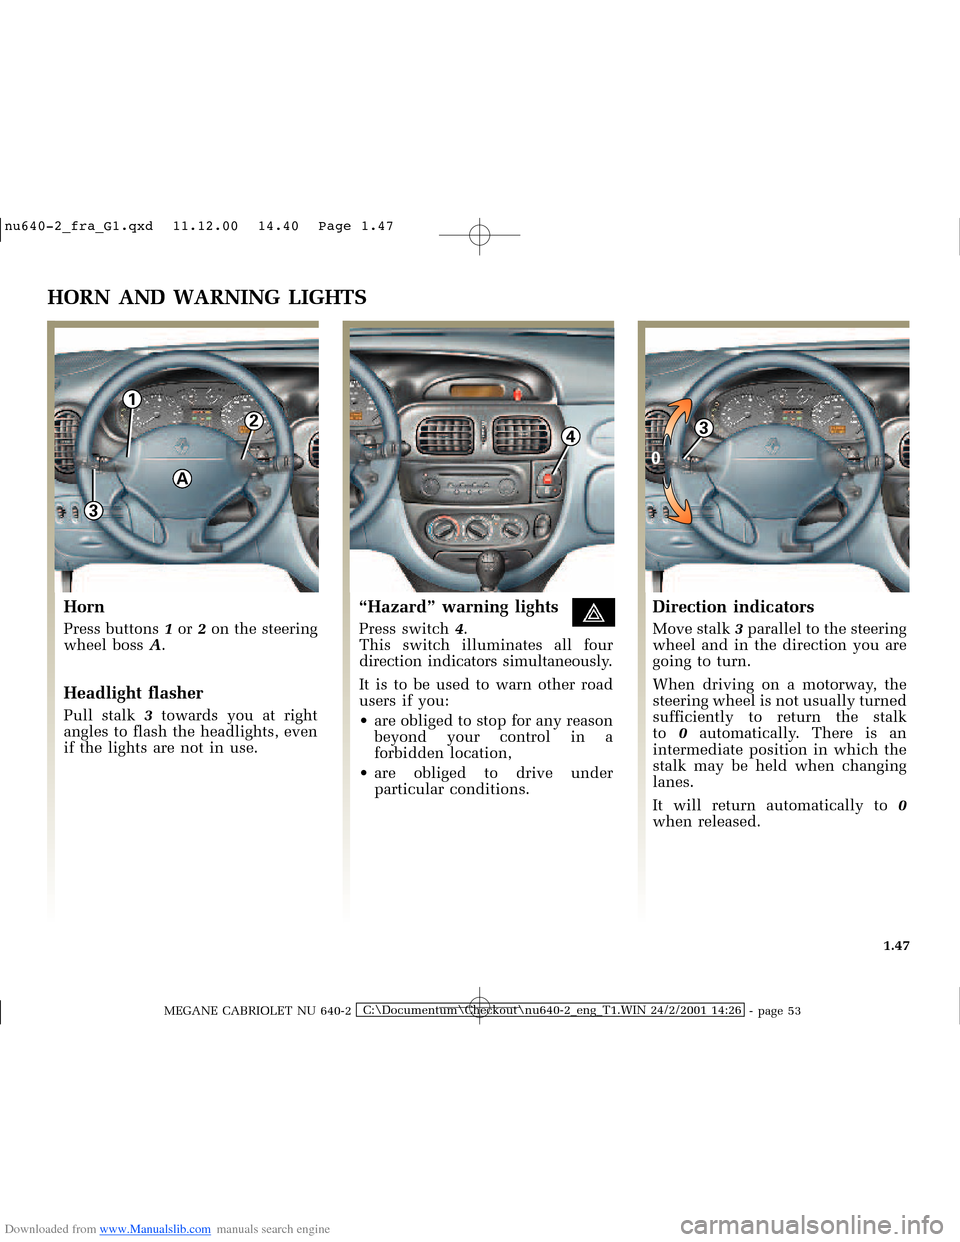 RENAULT MEGANE 2000 X64 / 1.G Owners Manual Downloaded from www.Manualslib.com manuals search engine 3
A
2
1
43
0
�Q�X������B�I�U�D�B�*���T�[�G� � ��������� � ������ � �3�D�J�H� ����
MEGANE CABRIOLET NU 640-2C:\Do